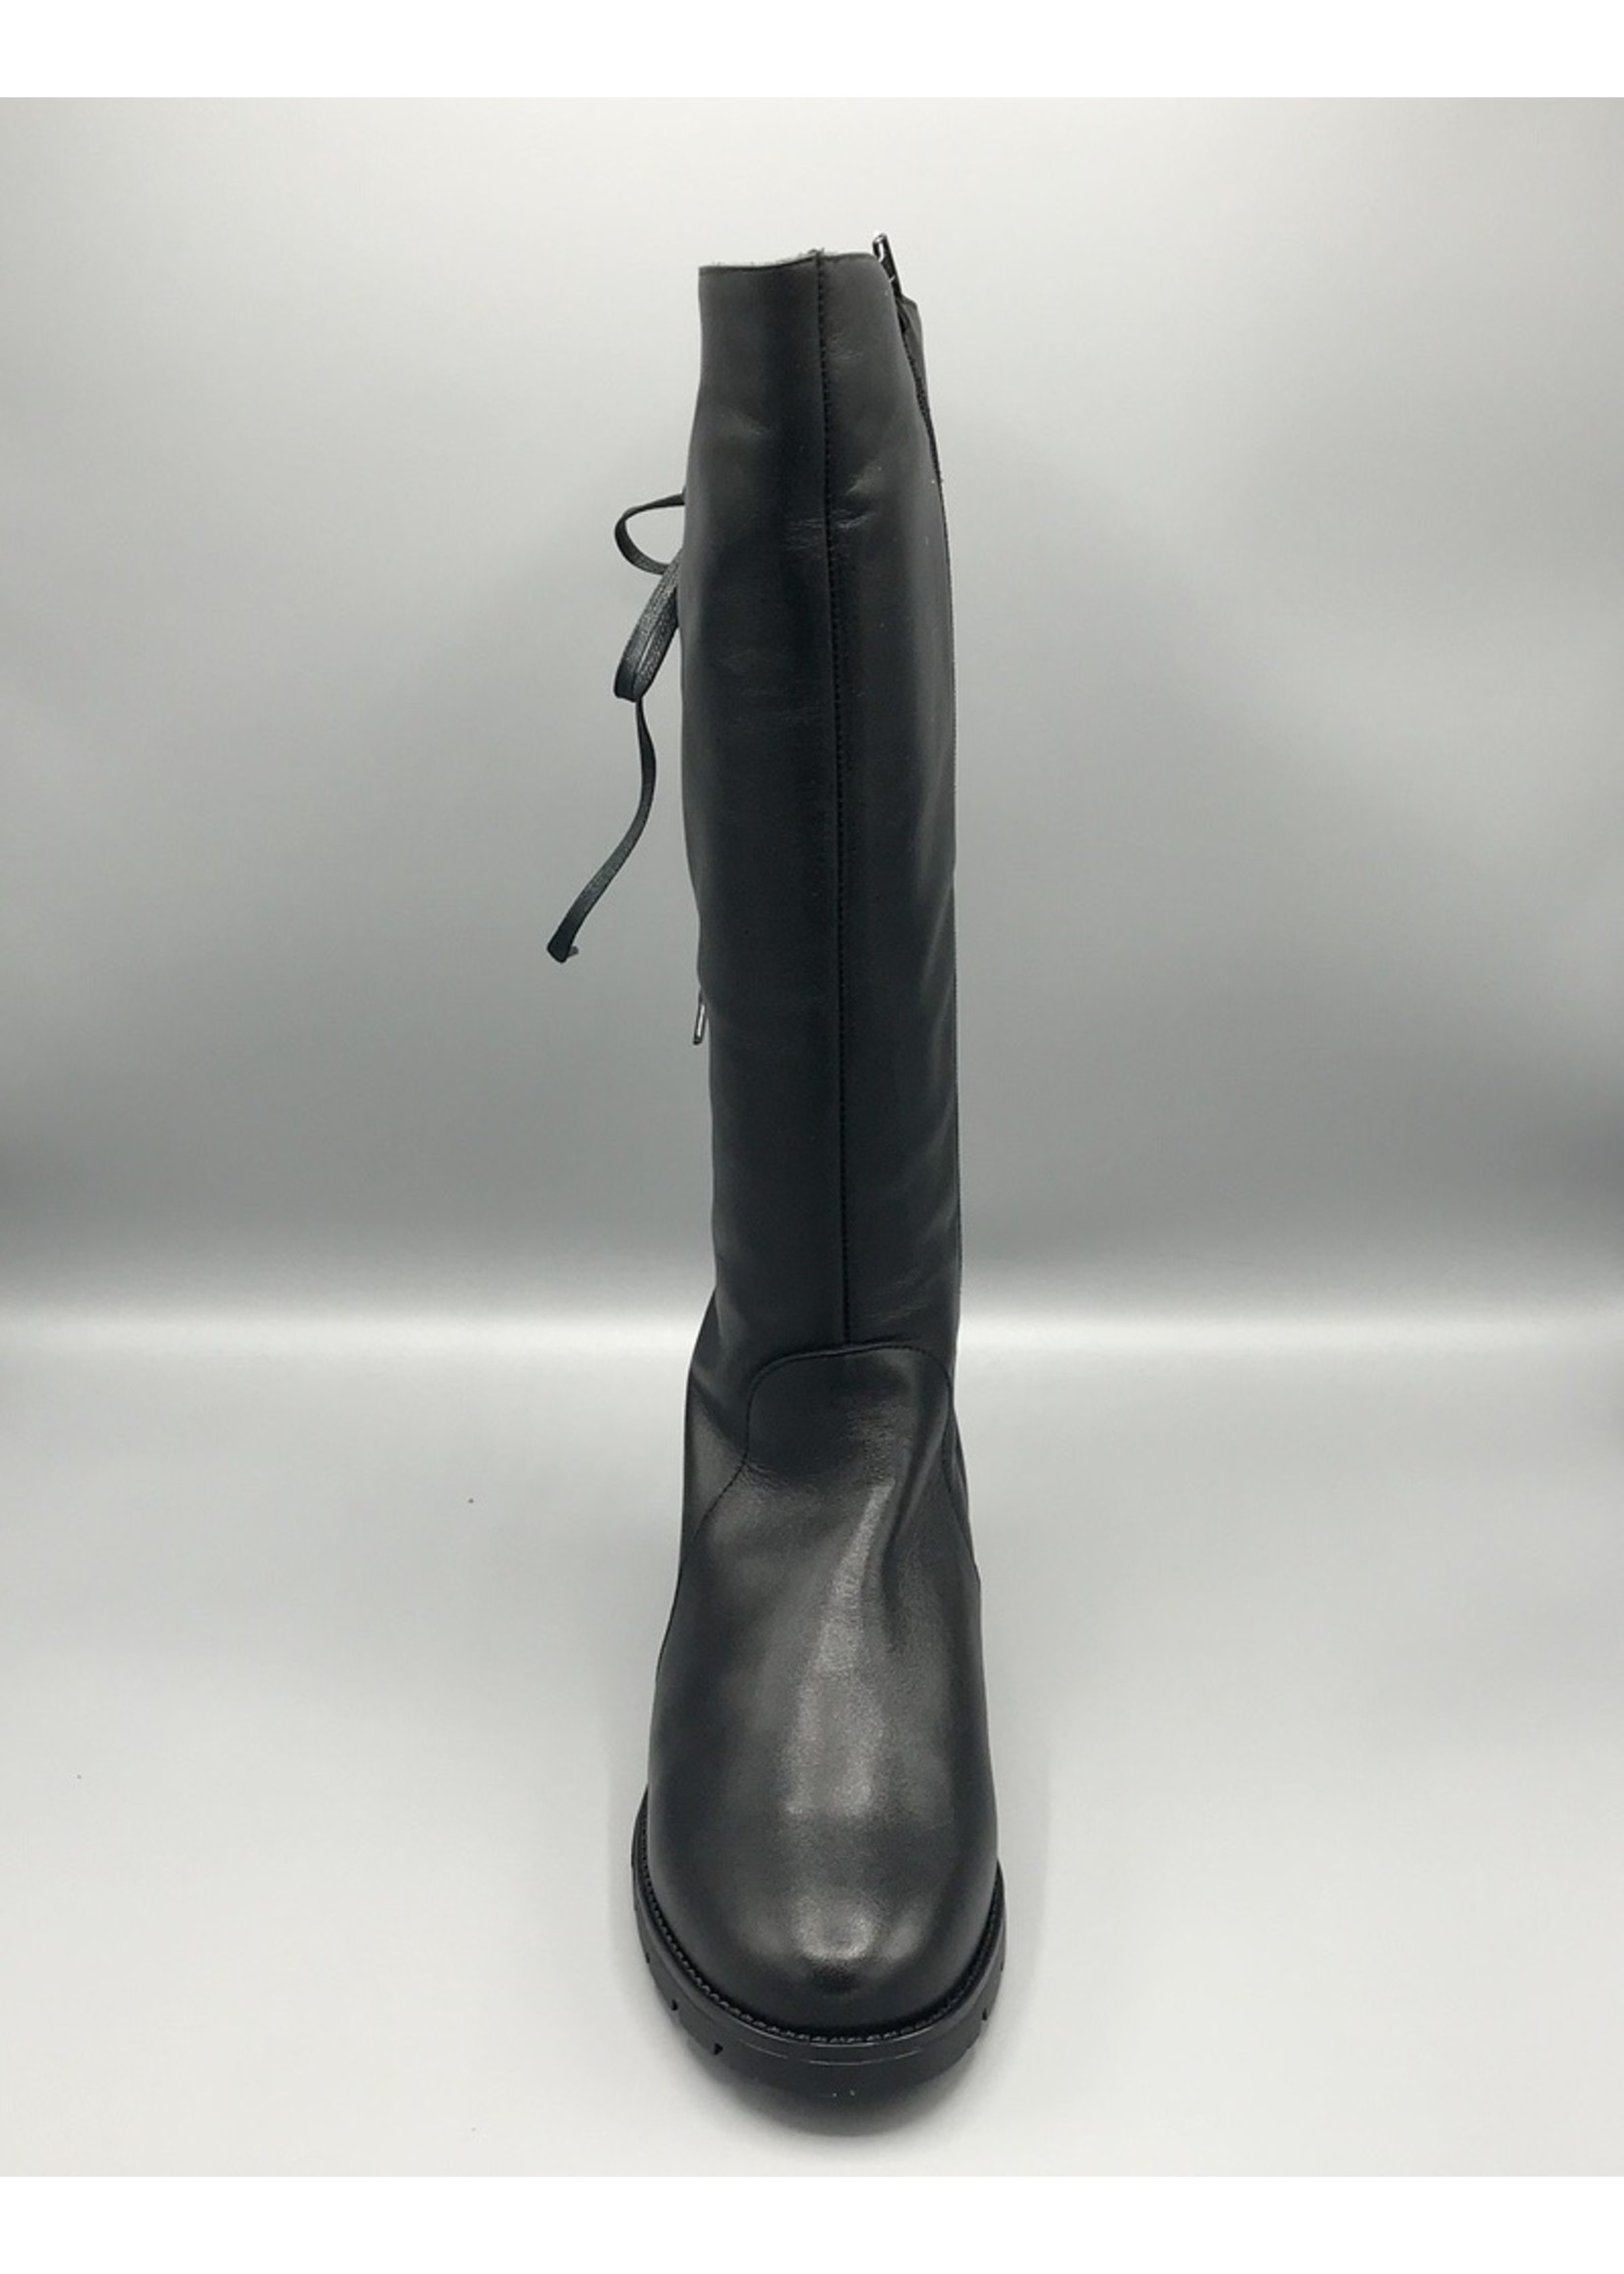 Valeria's Leather & Lace Tall Calf Boot